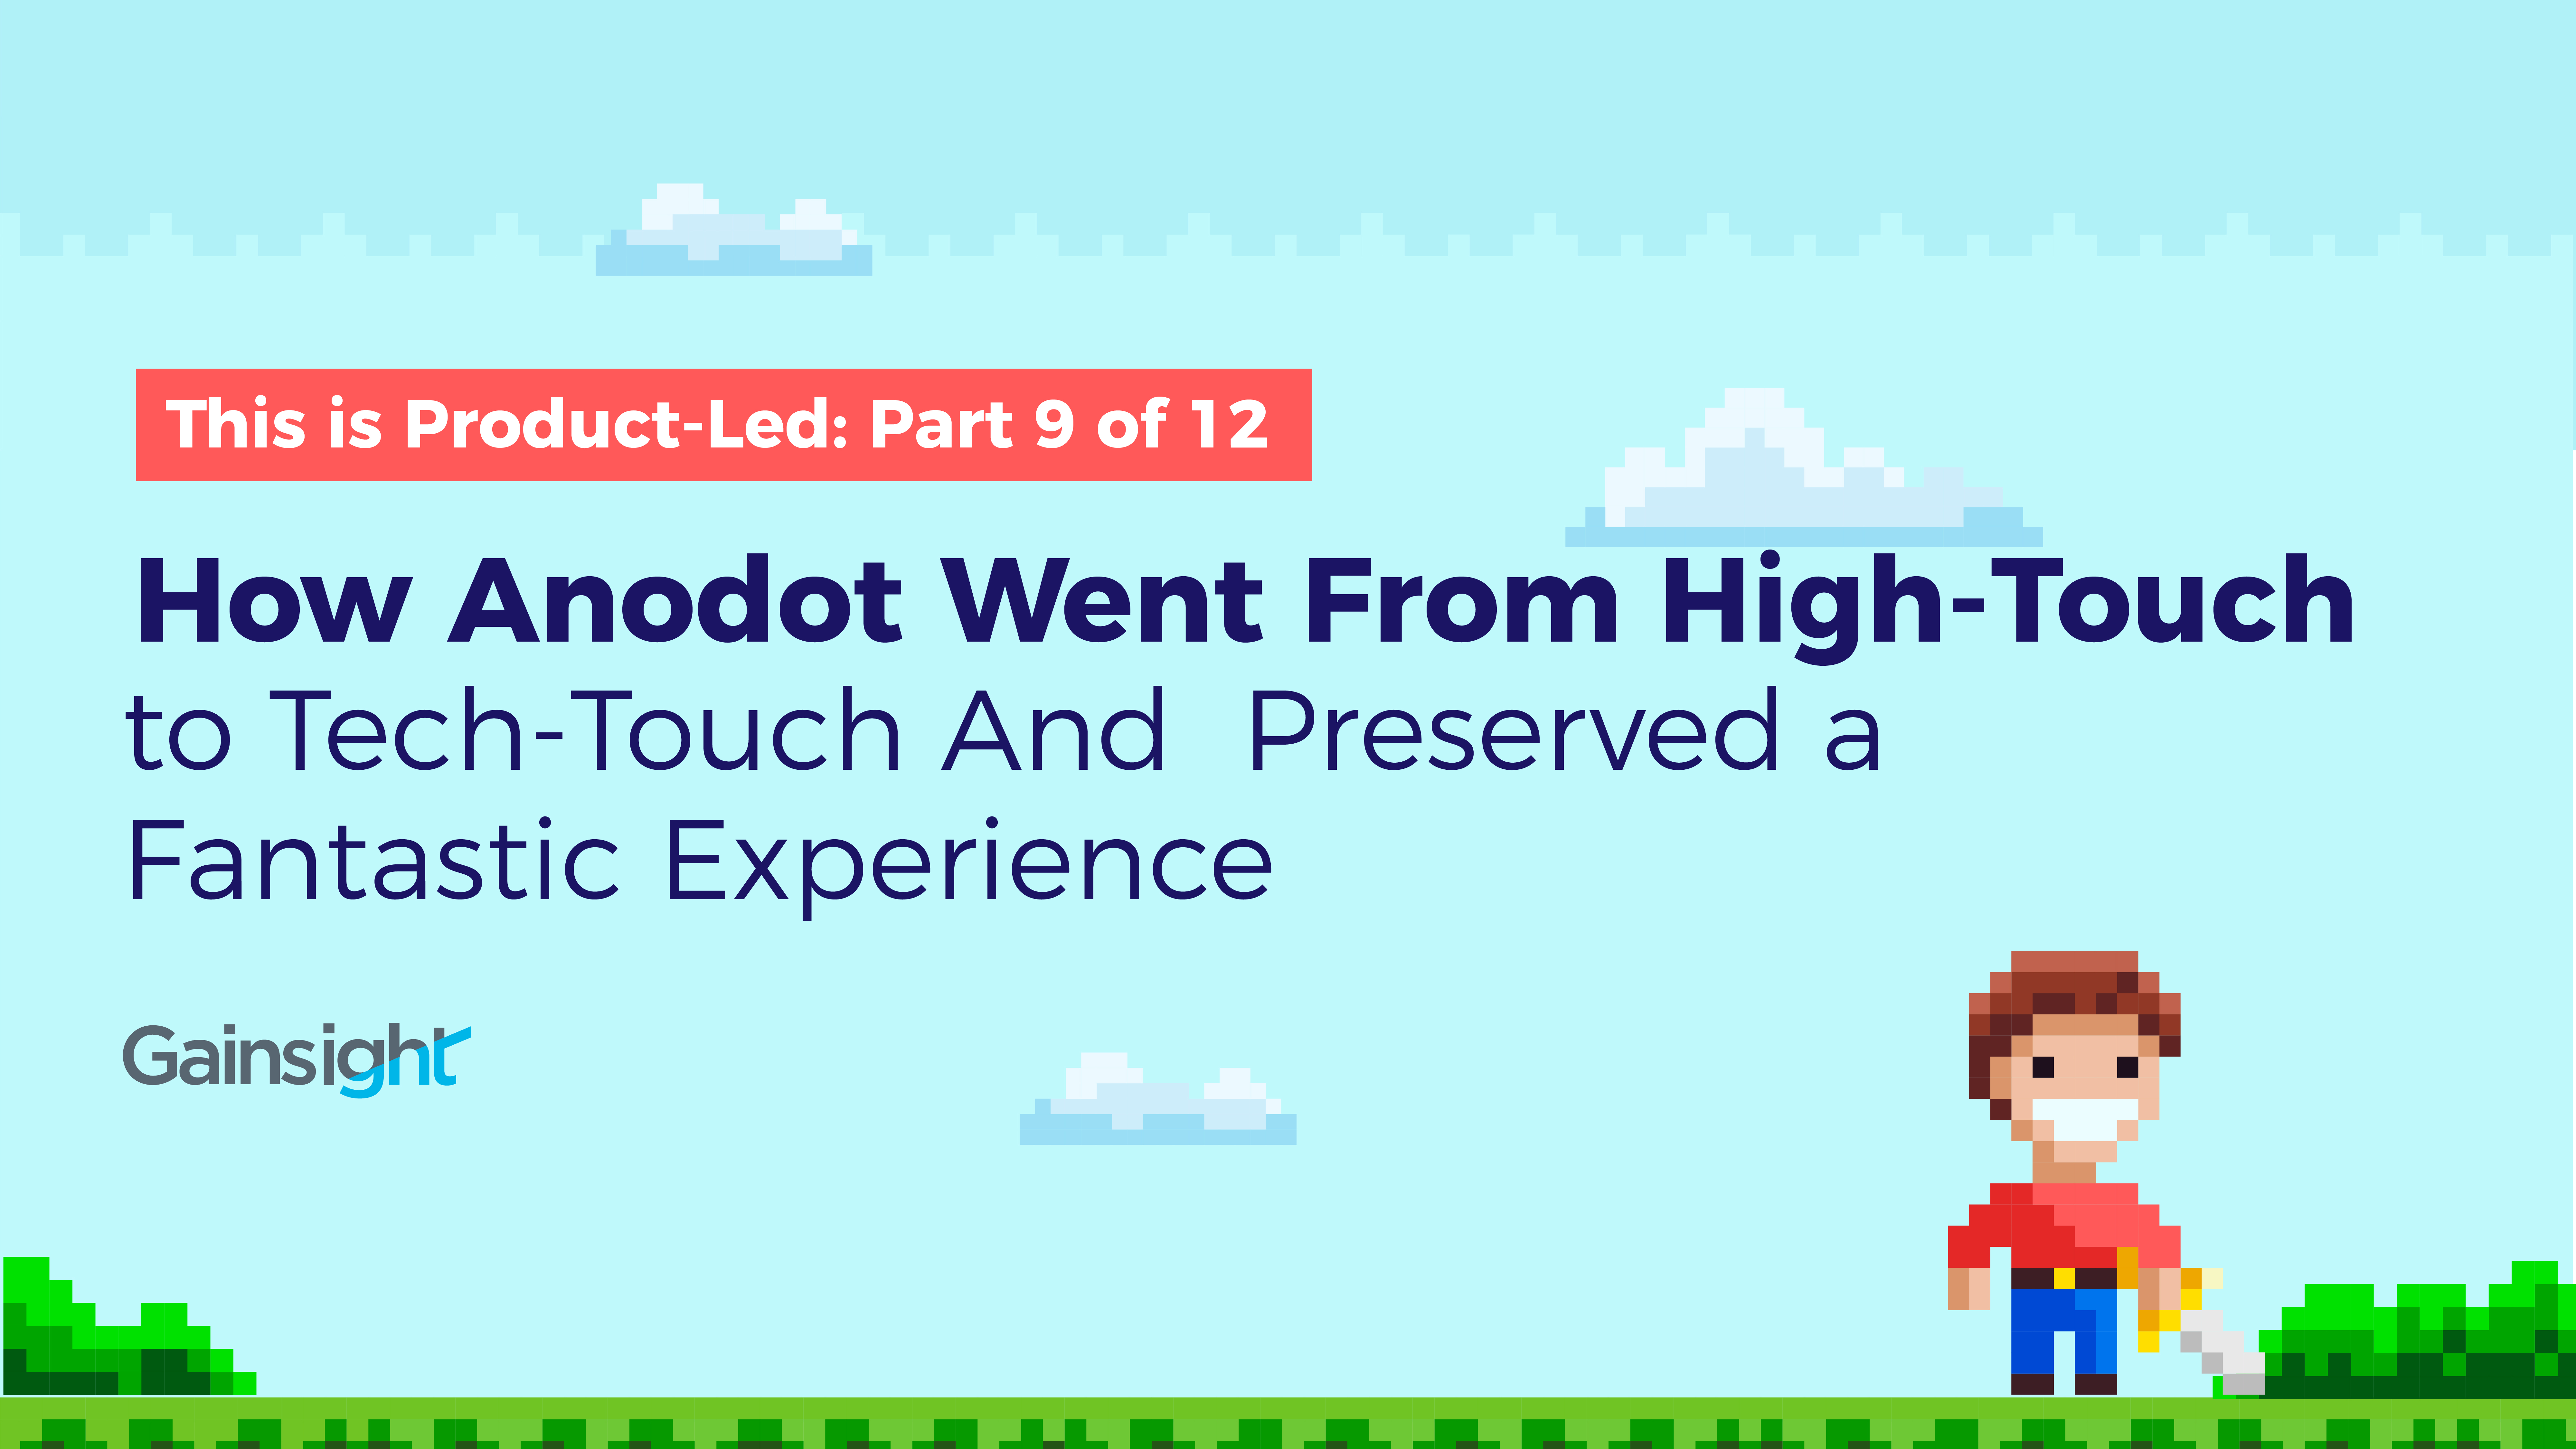 How Anodot Went From High-Touch to Tech-Touch And Preserved a Fantastic Experience Image